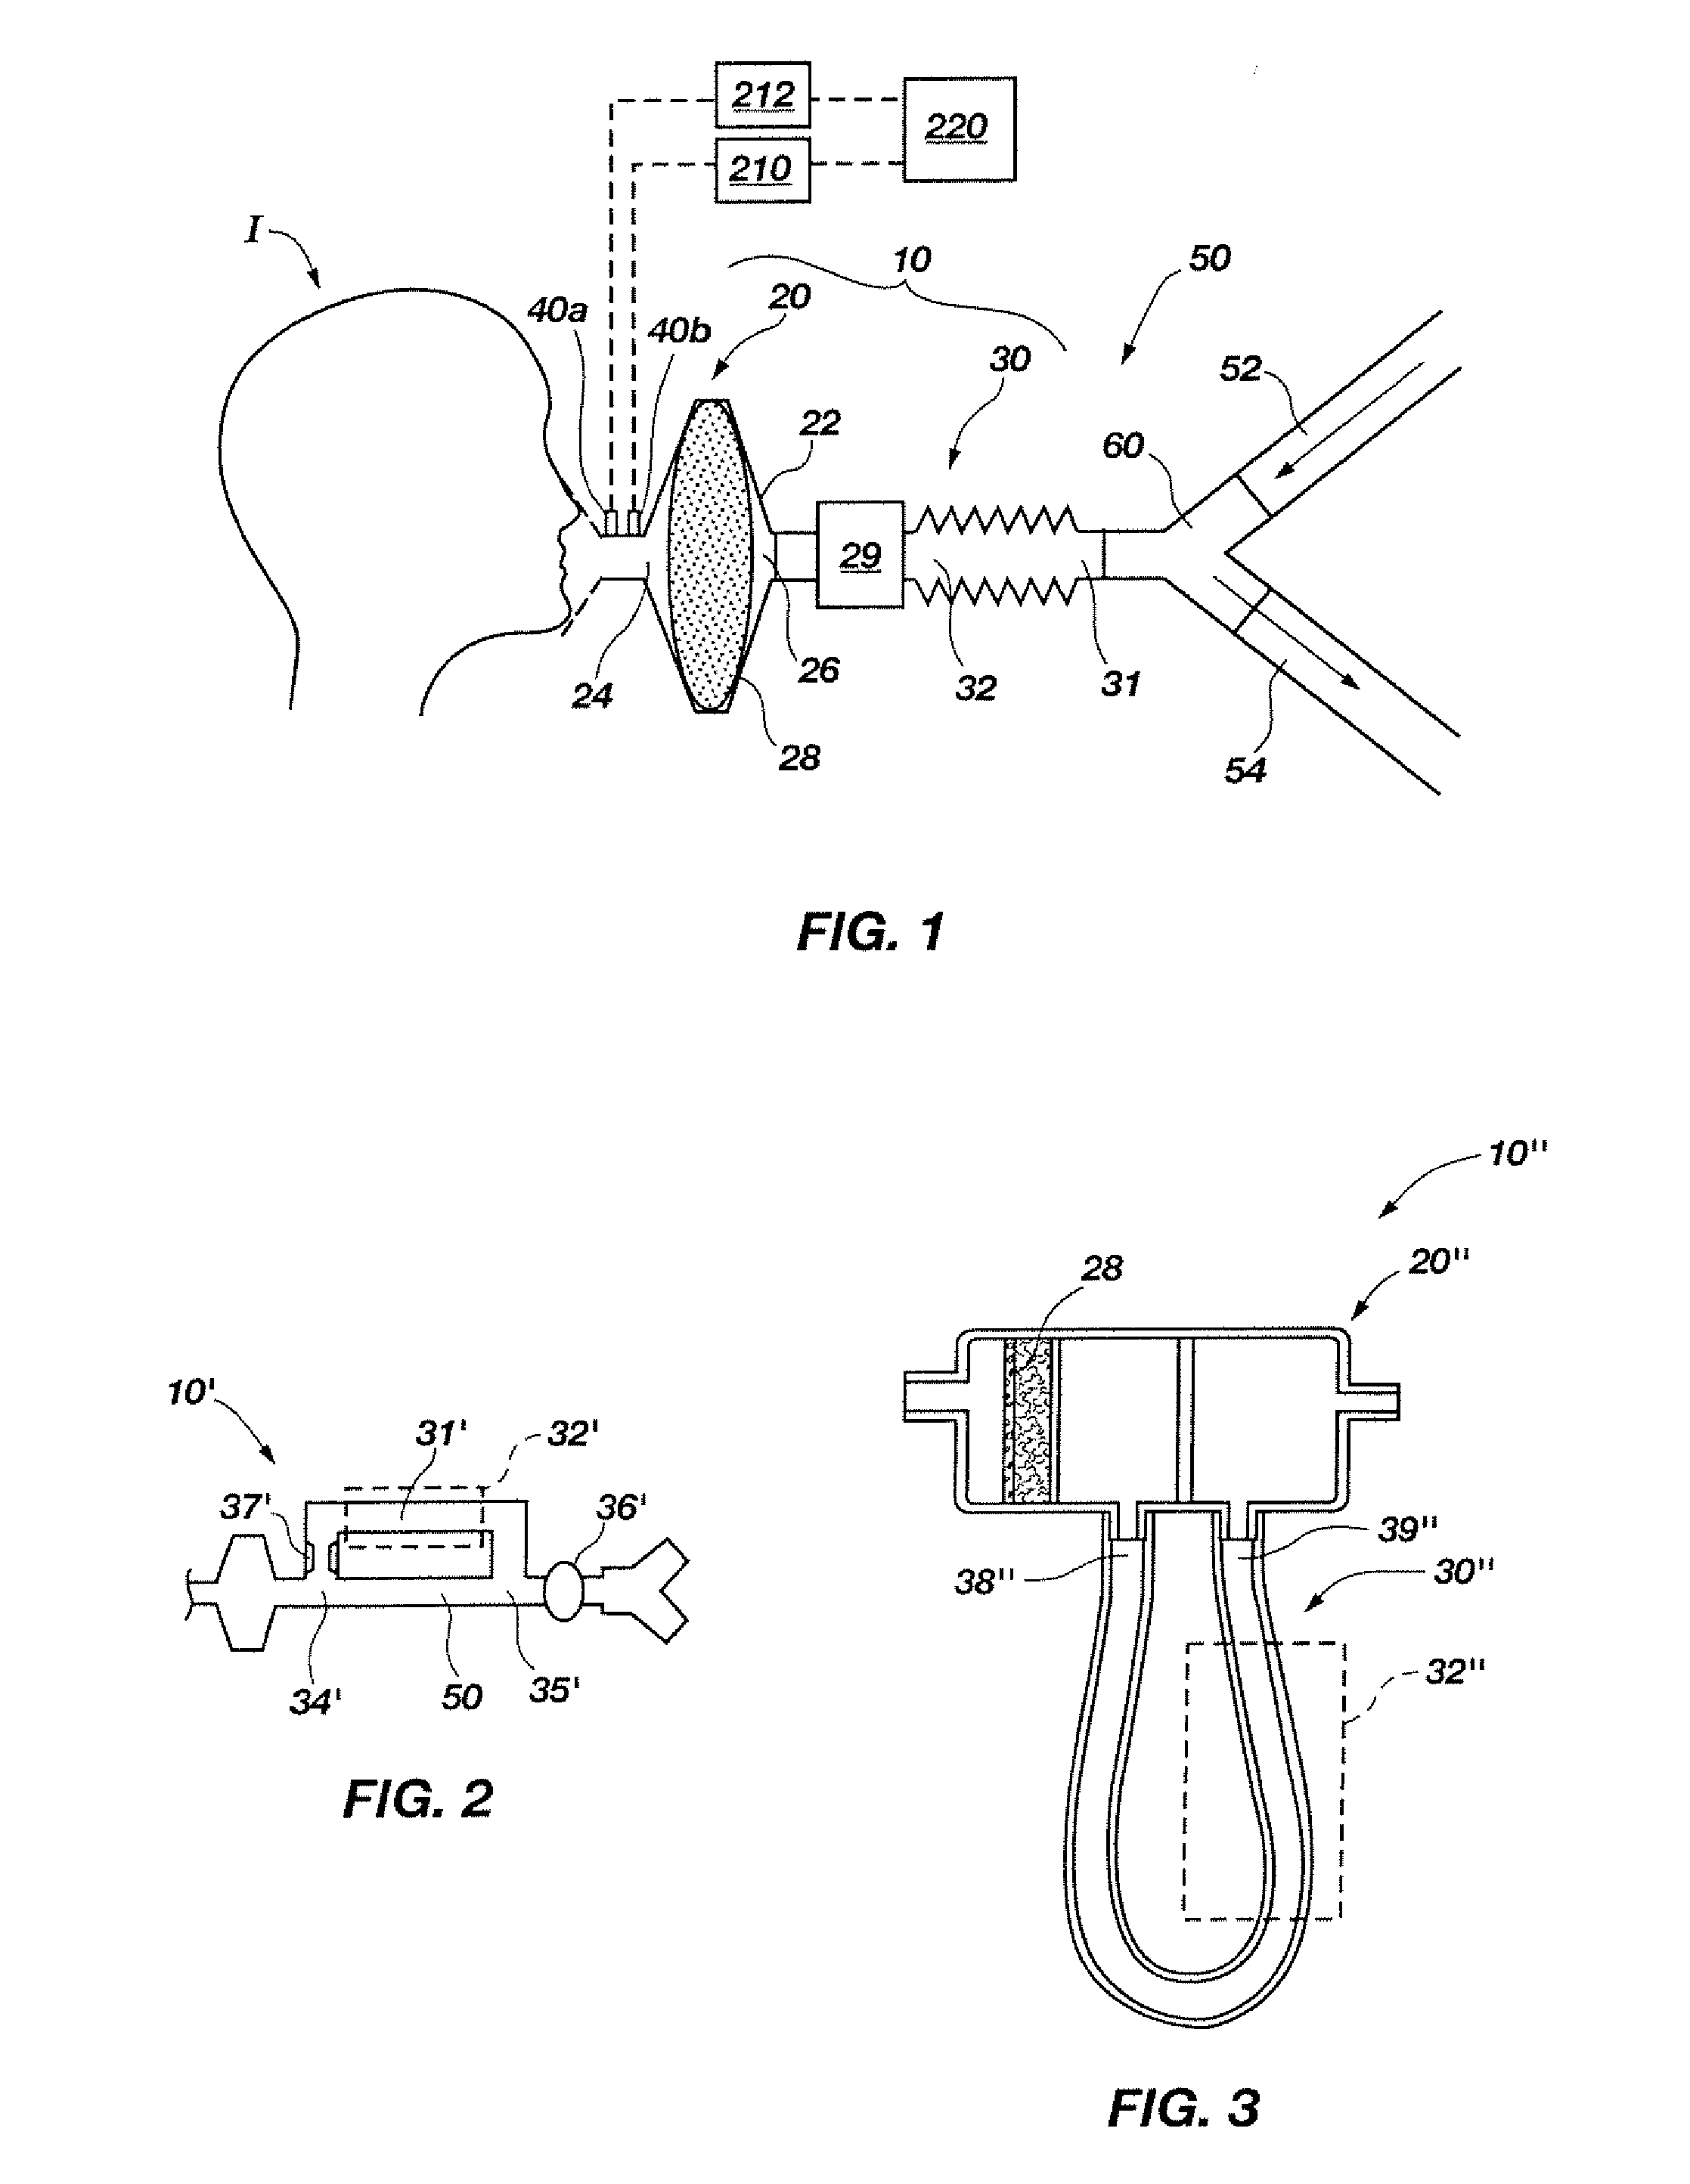 Method for reducing the effects of general anesthetics